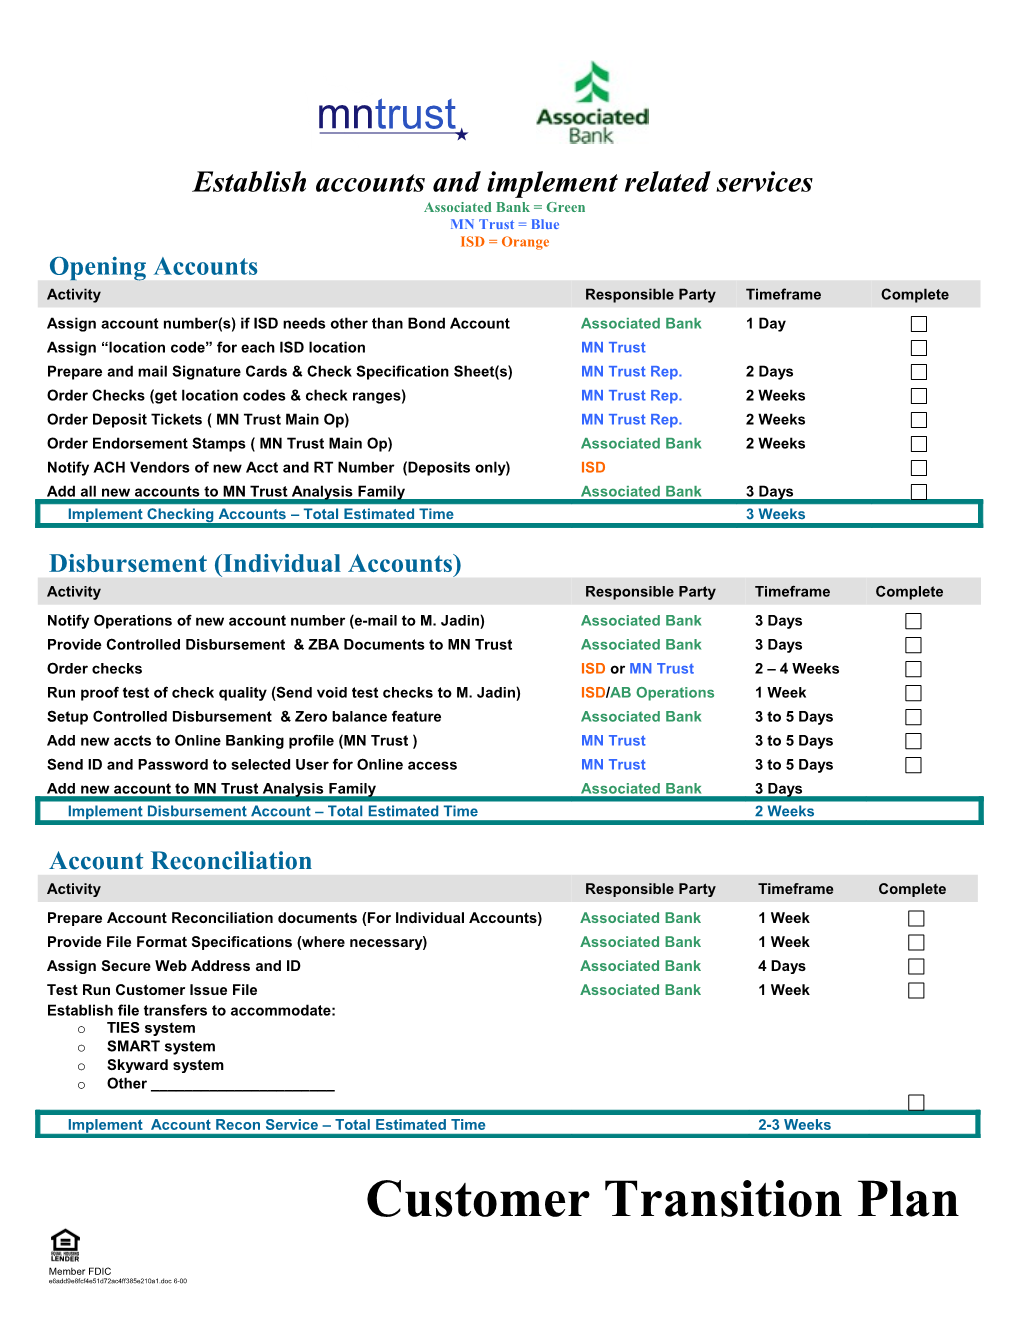 Establish Accounts and Implement Related Services